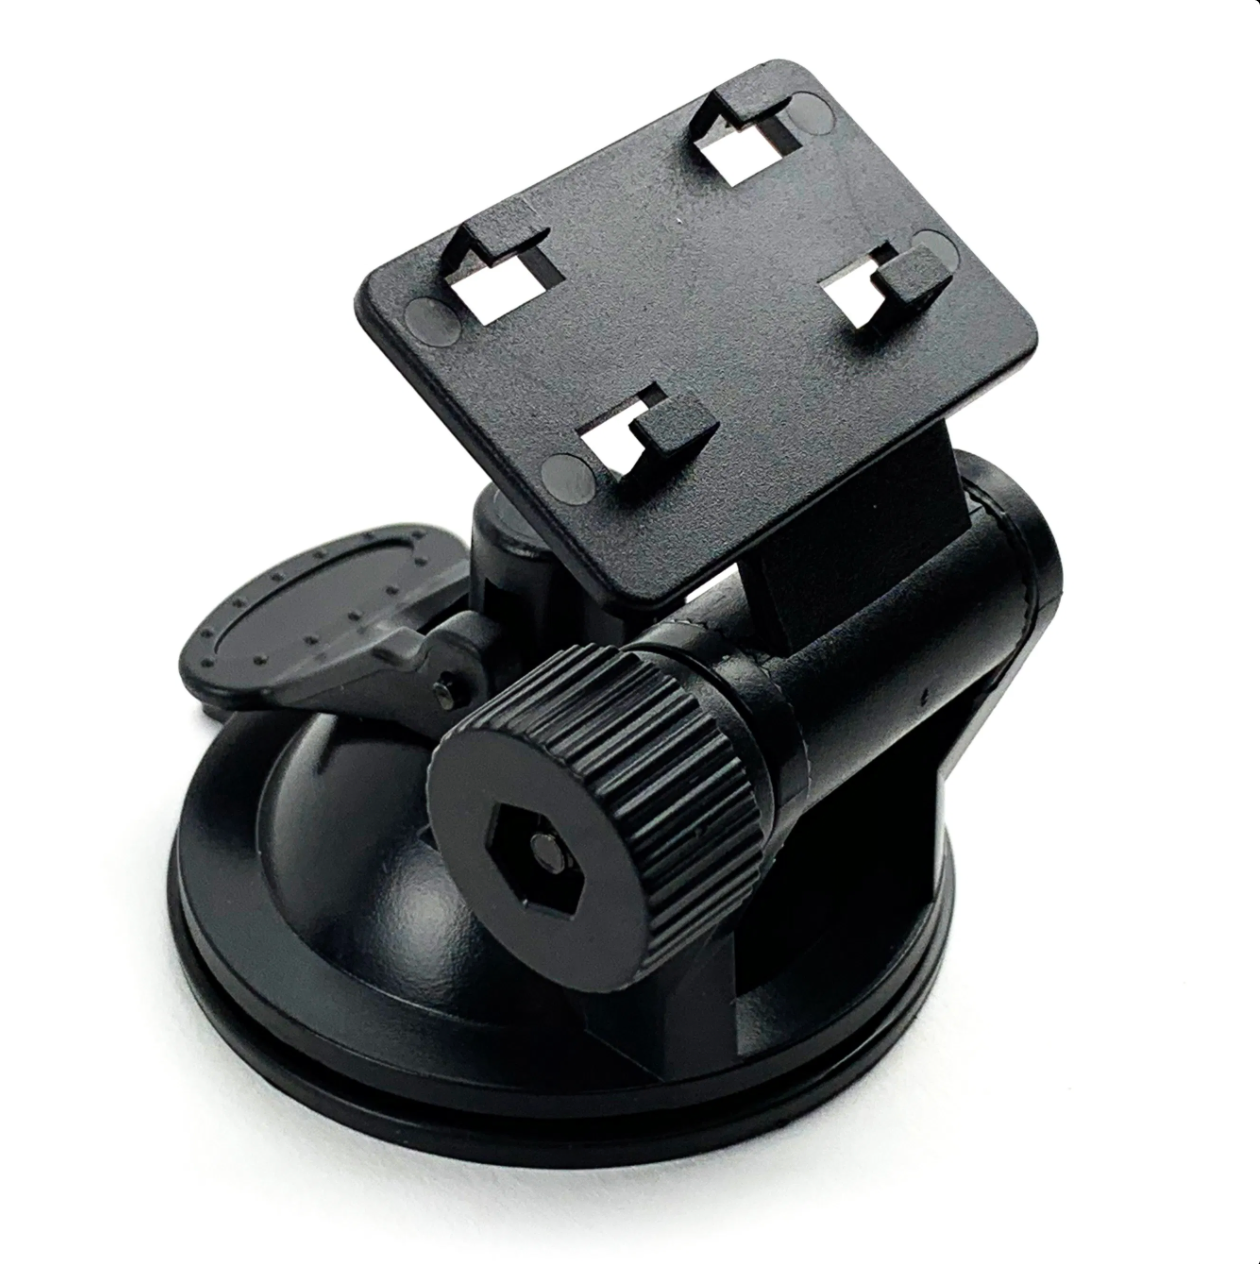 Rexing V1 MAX, V1P MAX, V1P 3rd Gen and V1P Pro Dash Cam Suction Cup Mount